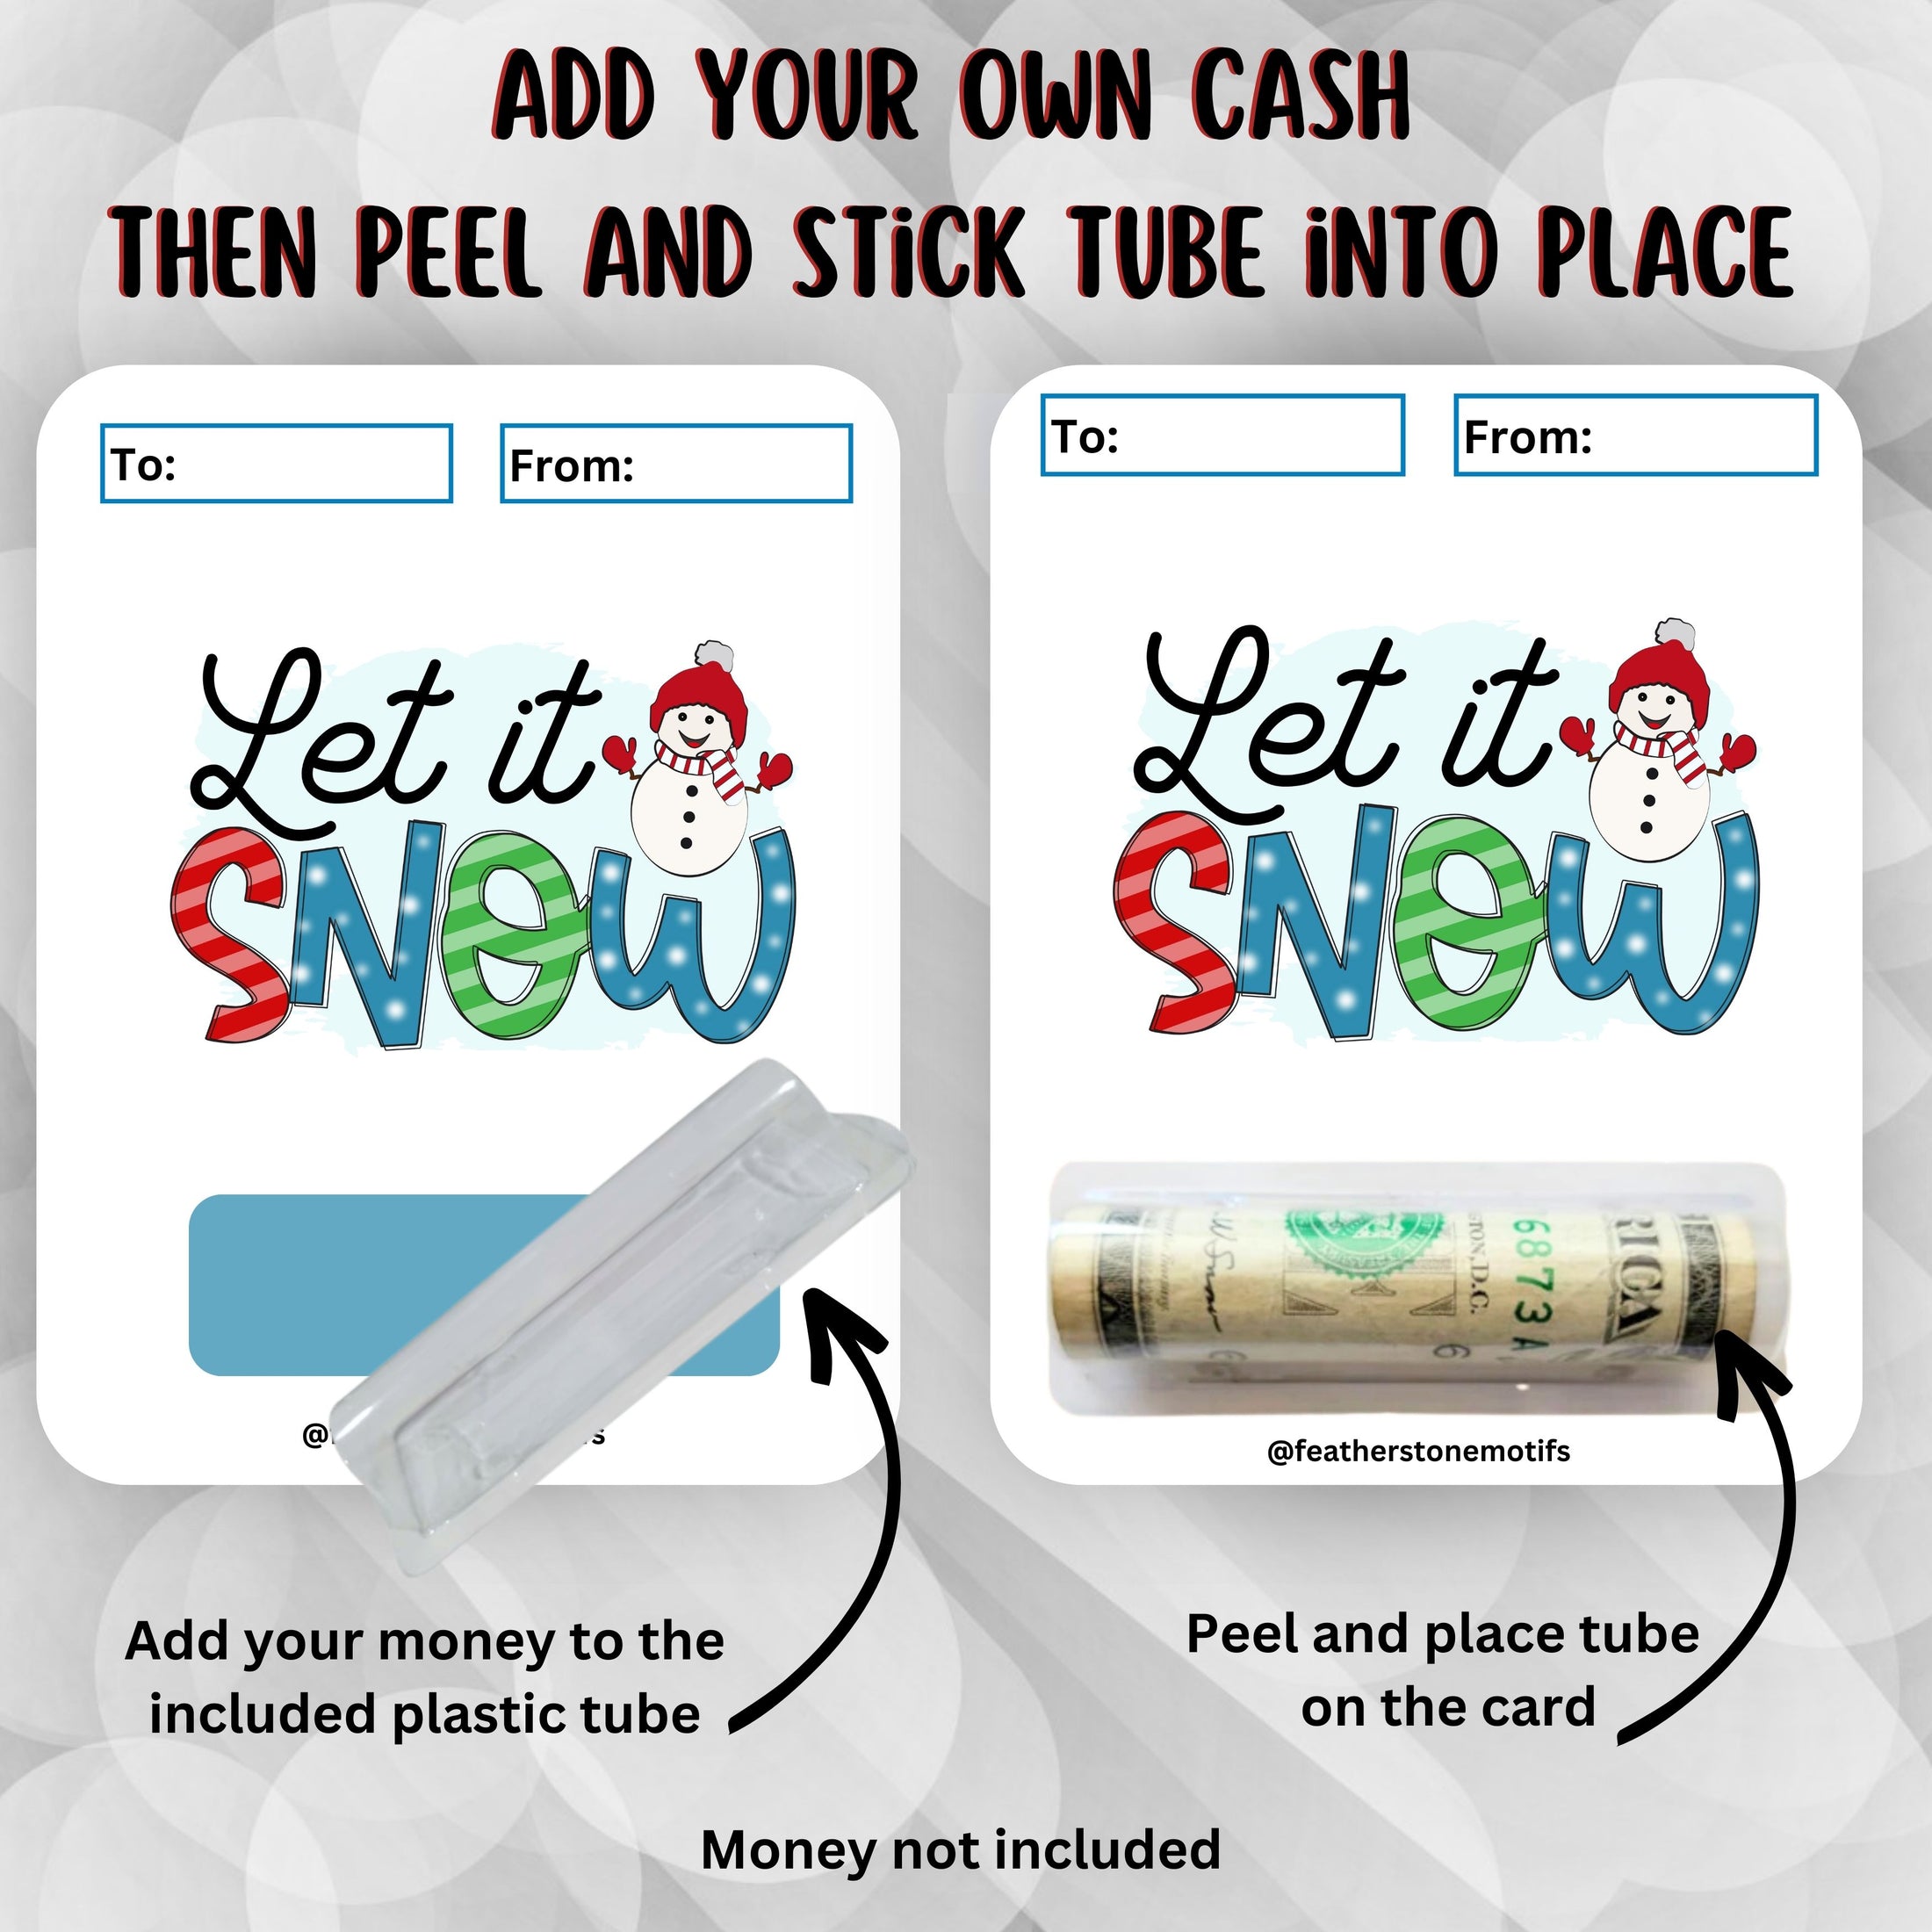 This image shows how to attach the money tube to the Let it Snow Money Card.